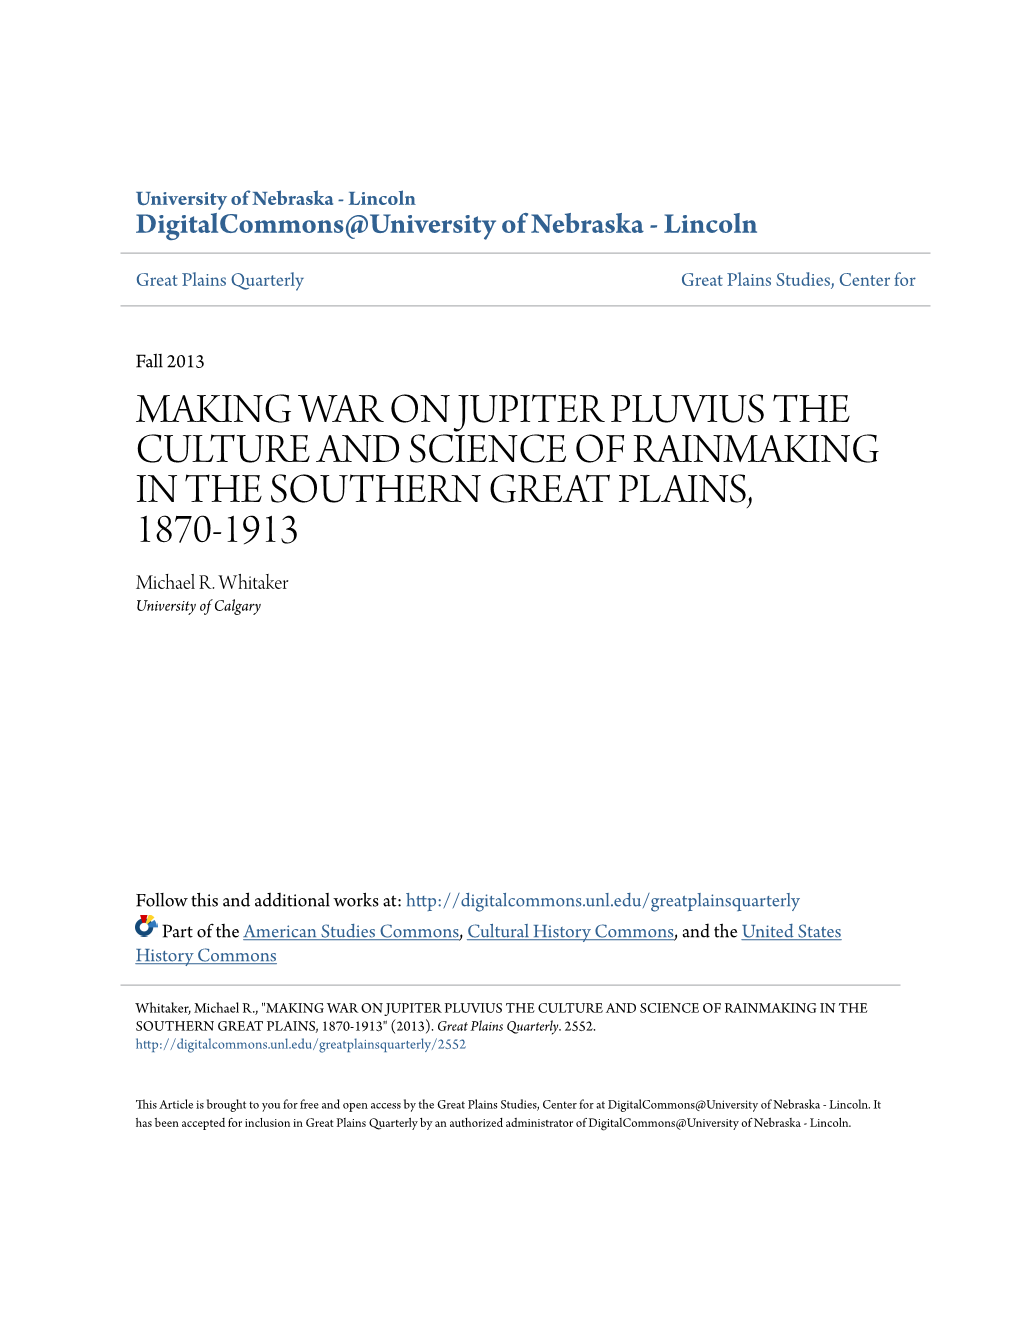 MAKING WAR on JUPITER PLUVIUS the CULTURE and SCIENCE of RAINMAKING in the SOUTHERN GREAT PLAINS, 1870-1913 Michael R